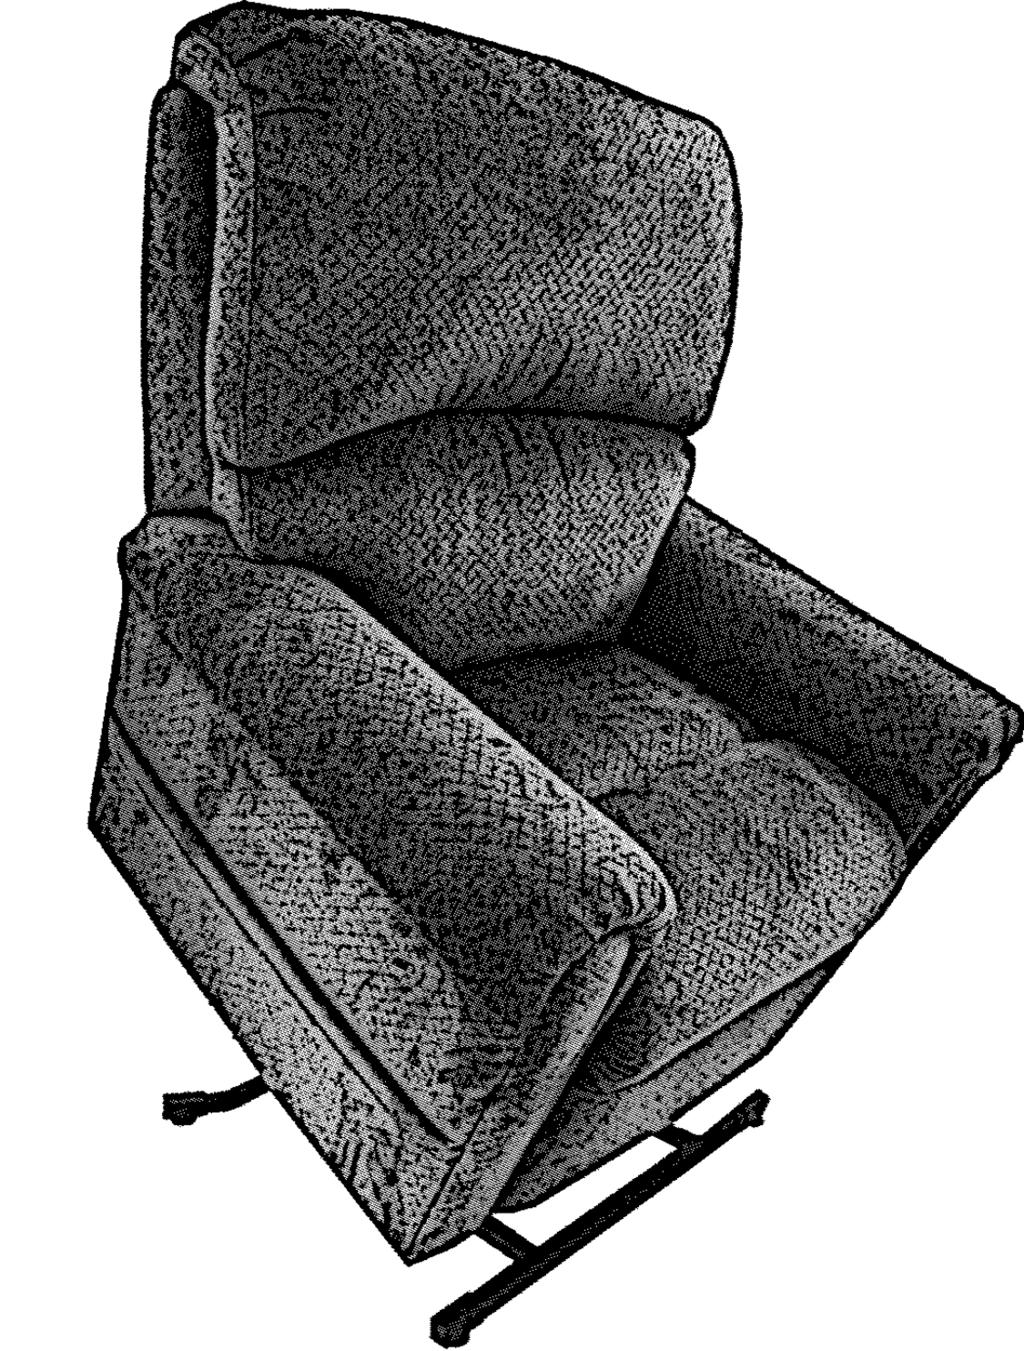 ABOUT YOUR LIFT CHAIR Serta Perfect Lift Chair/Serta ComfortLift BODY COMPONENTS Lift chairs are equipped with several frame and electrical components.